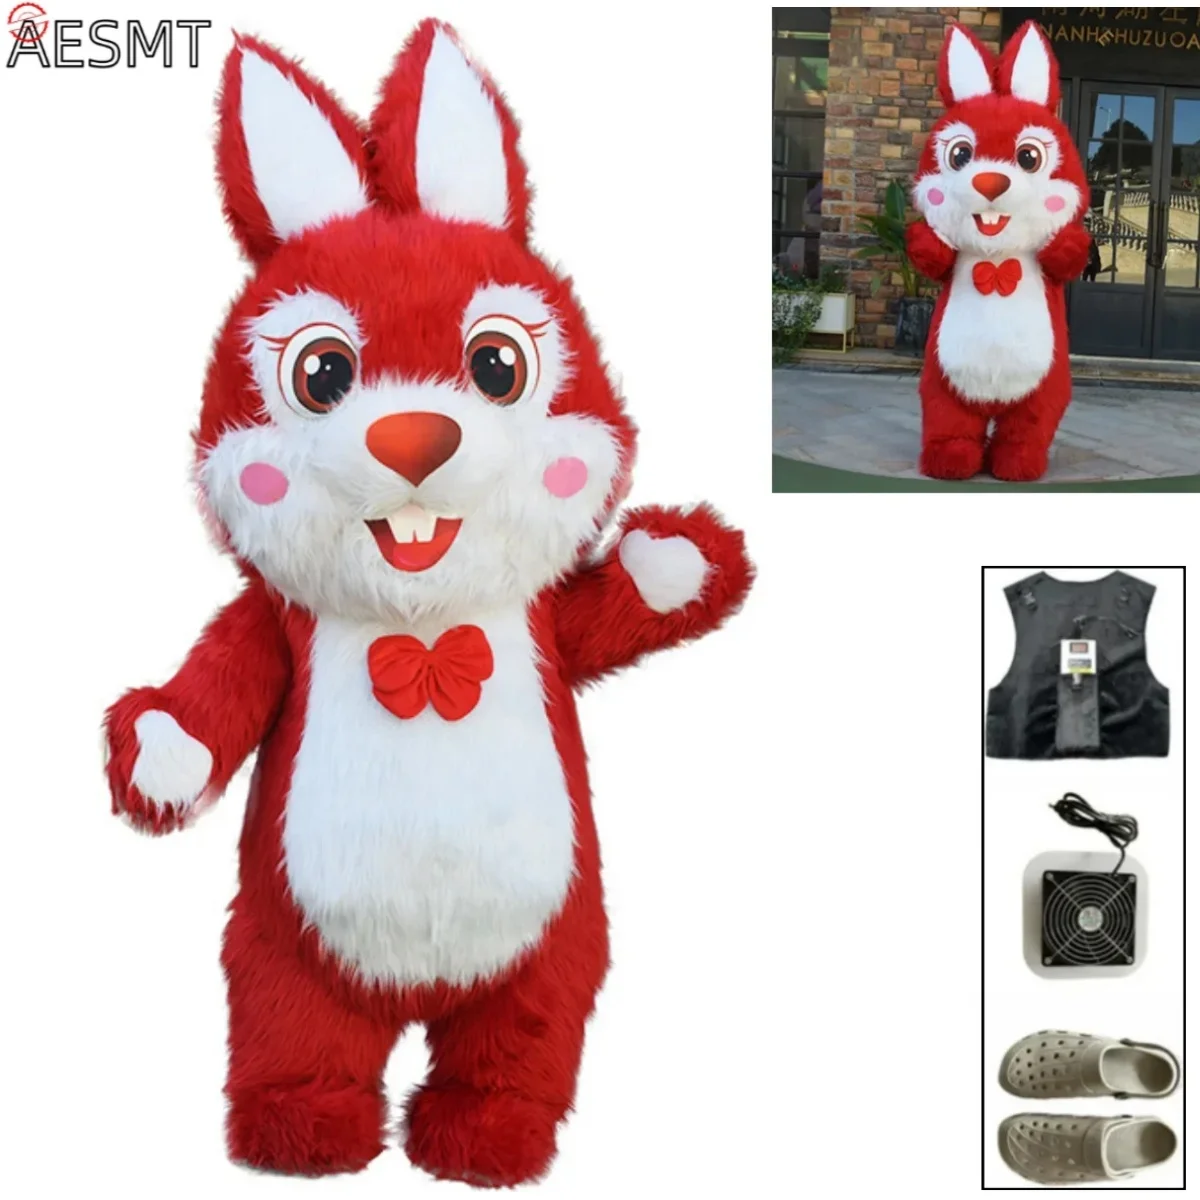 

260cm Large Inflatable Rabbit Costume Mascot Plush Cartoon Doll Advertising Party Carnival Event Adult Dress Atmosphere Clothing